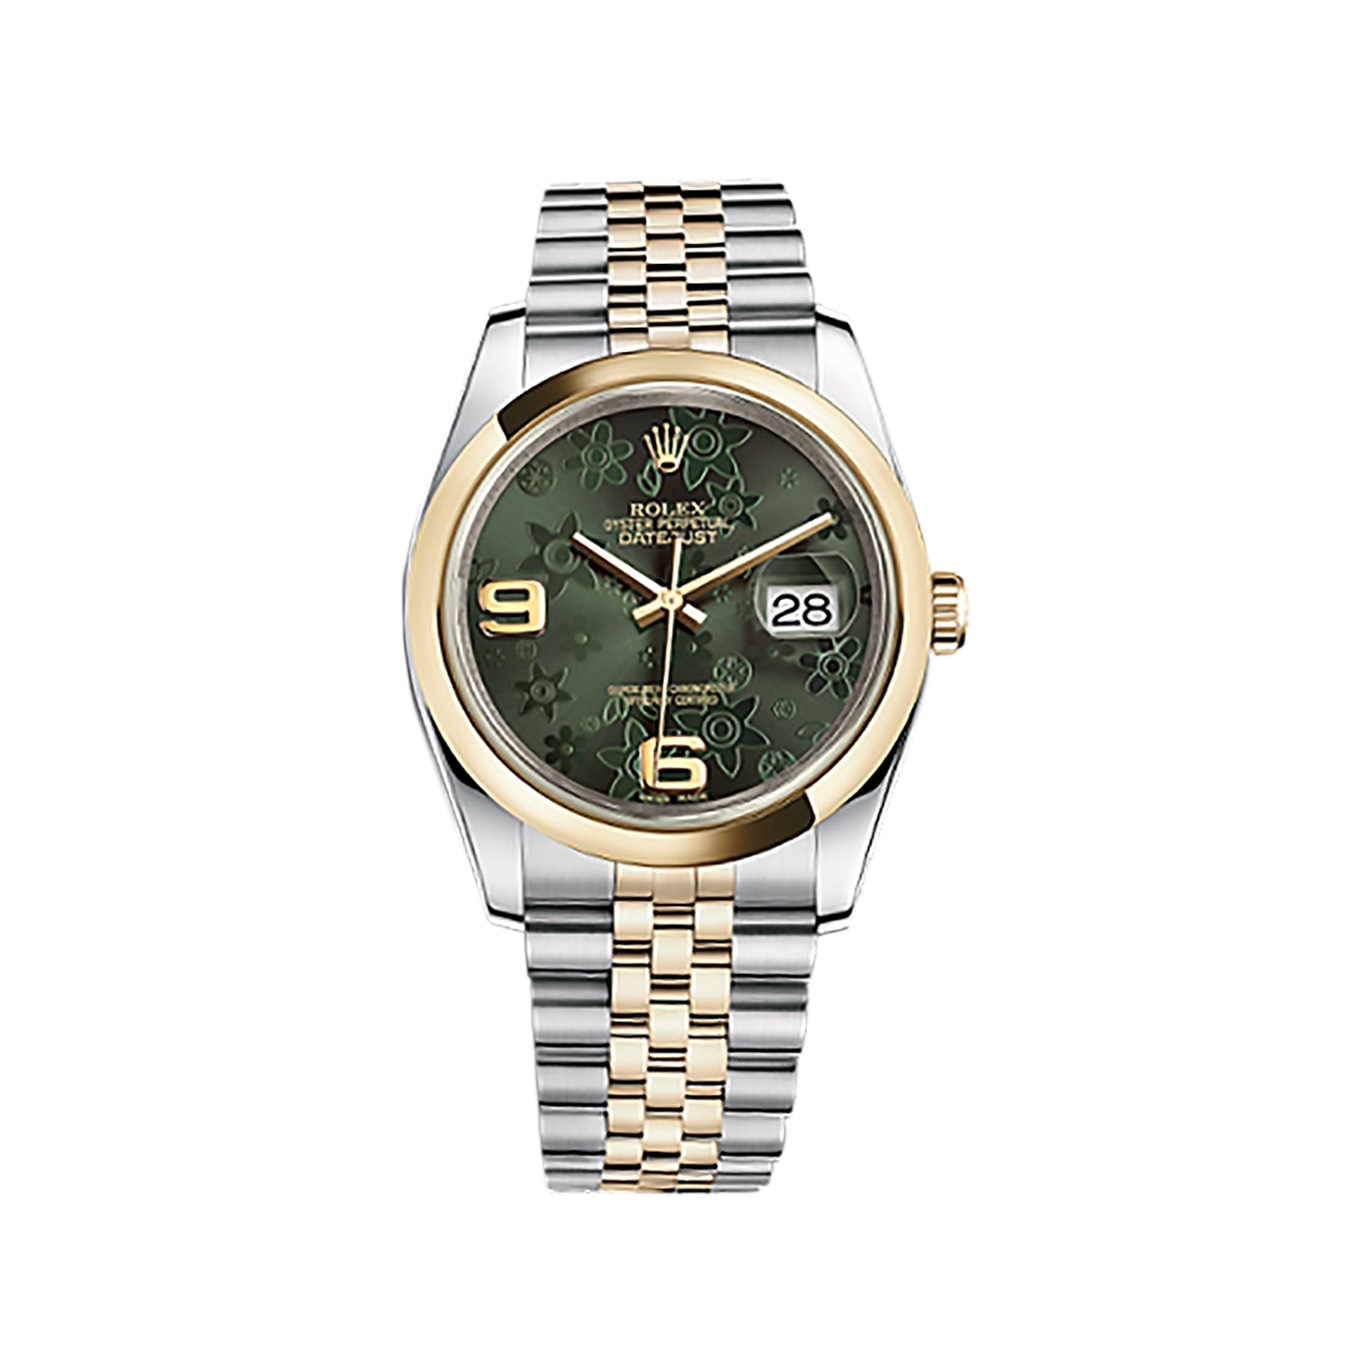 Datejust 36 116203 Gold & Stainless Steel Watch (Green Floral Motif)